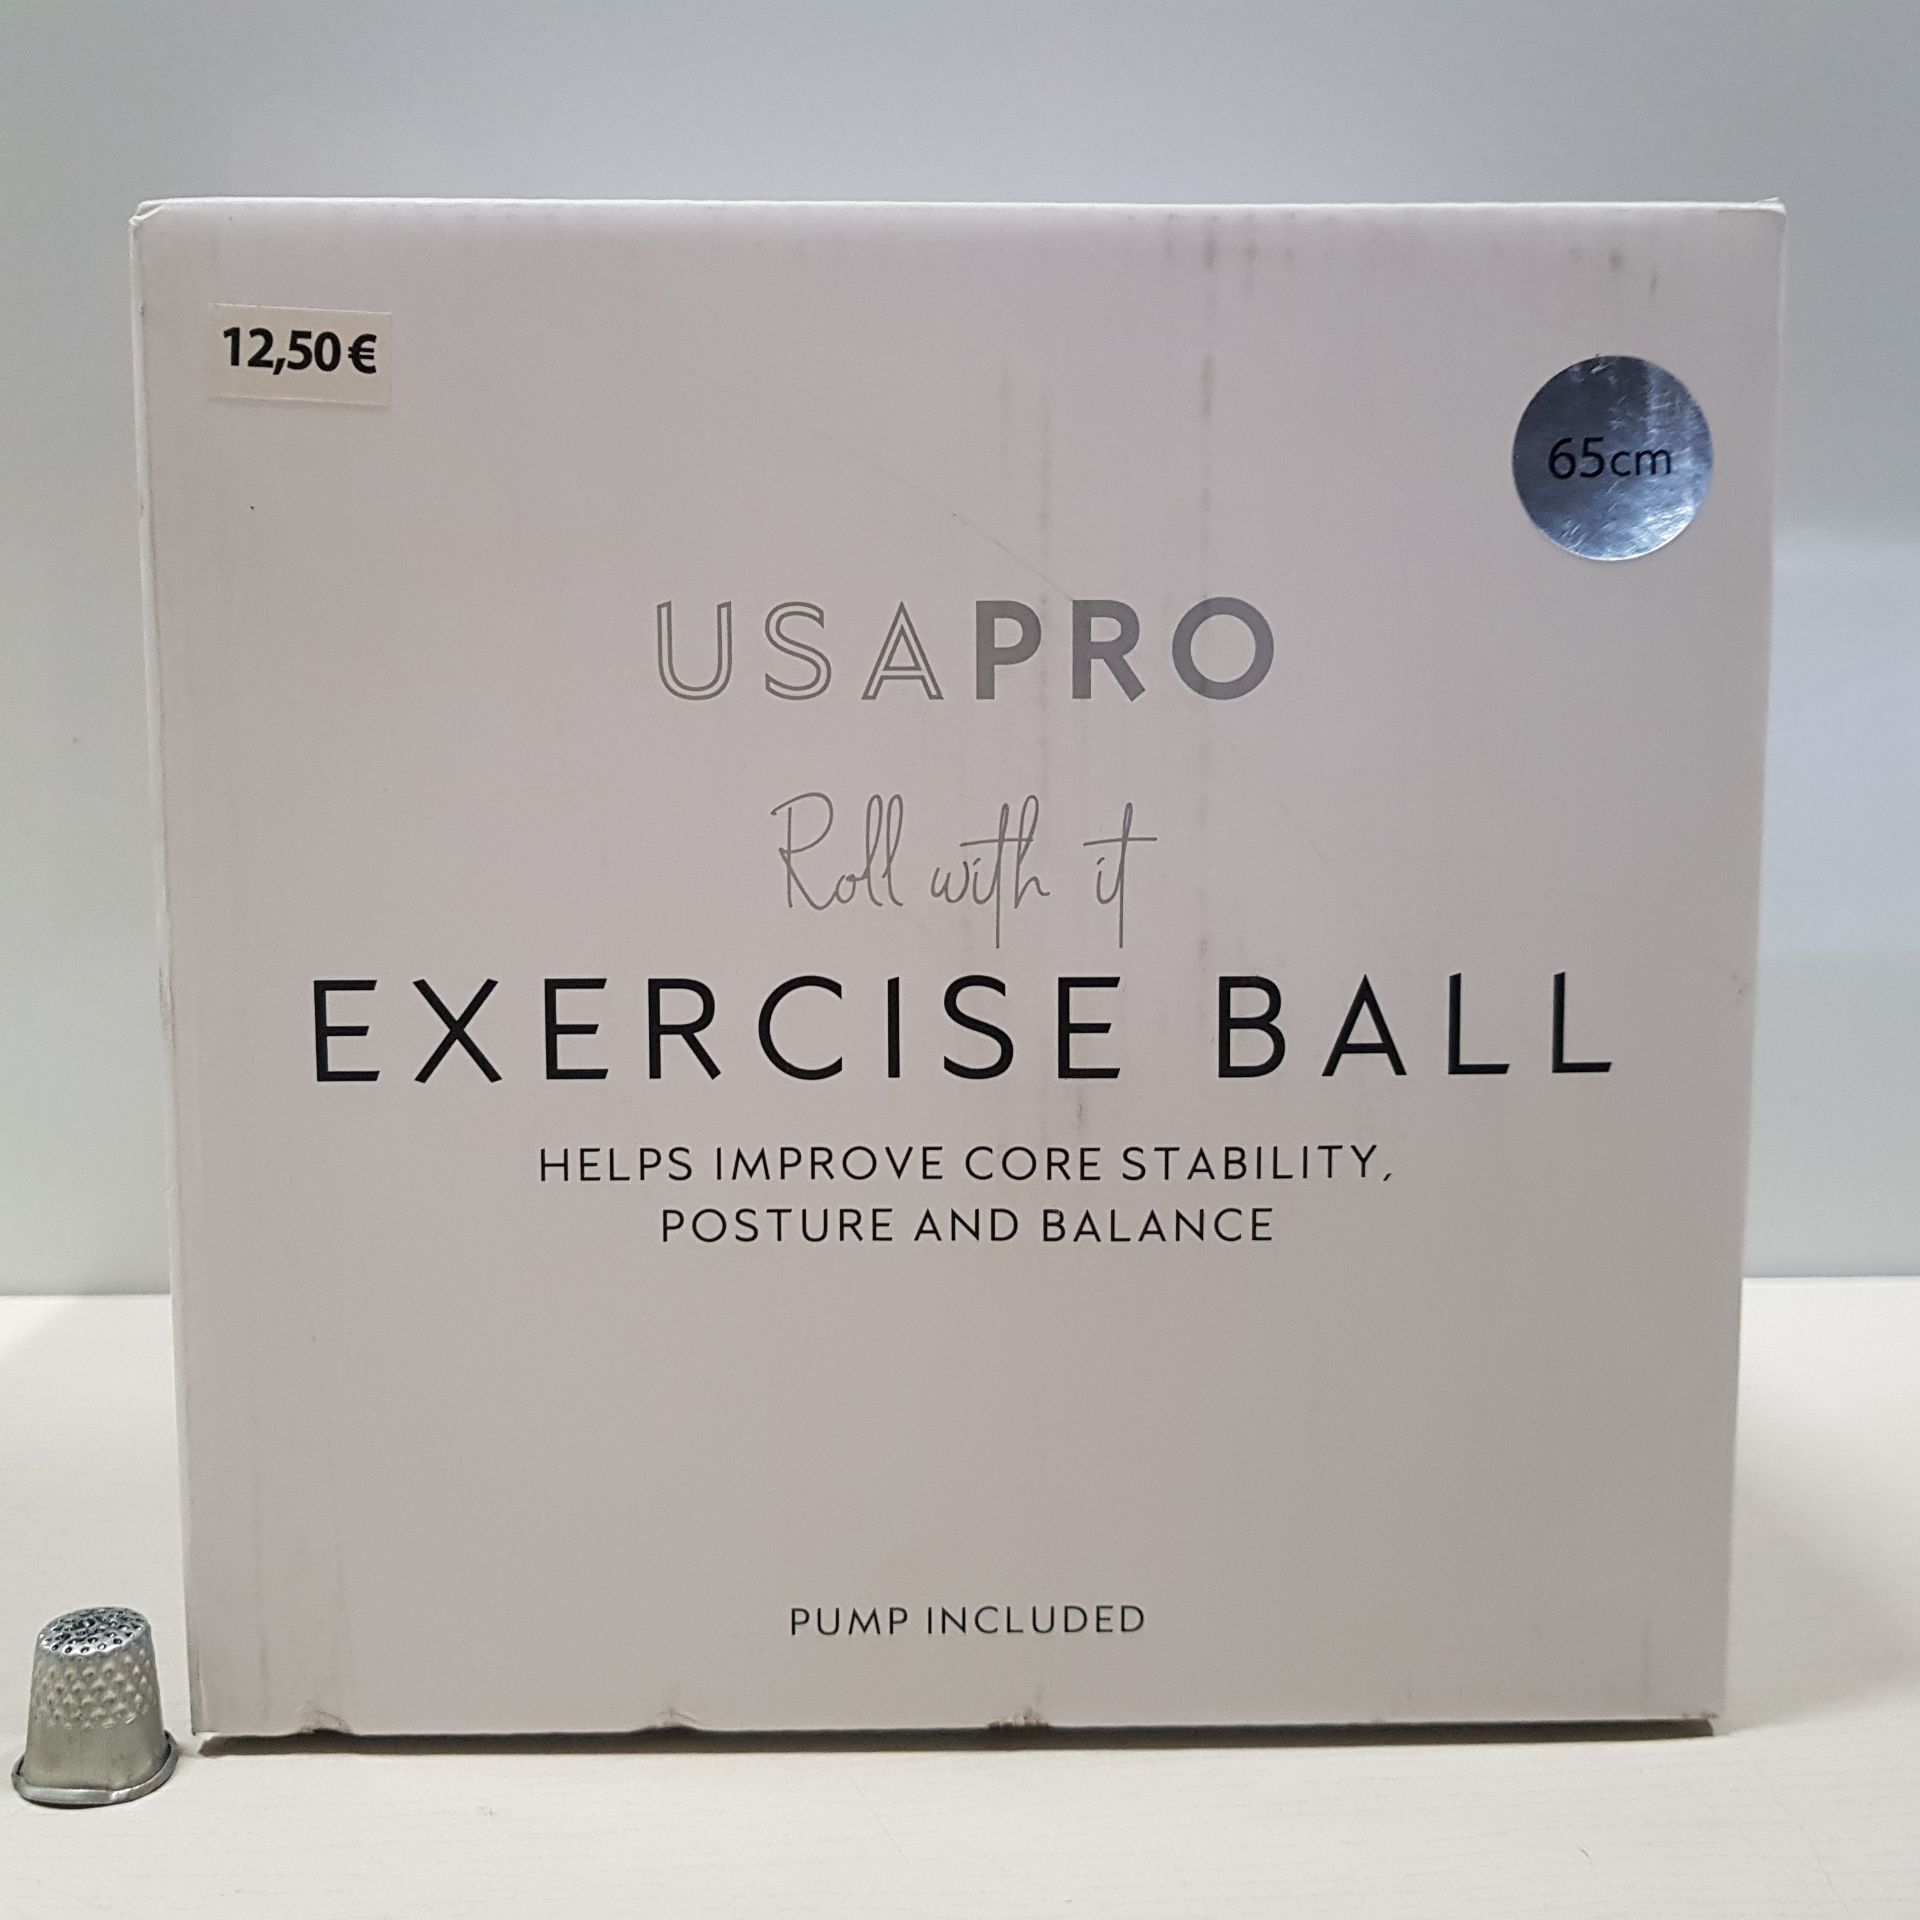 24 X BRAND NEW USA PRO EXERCISE BALL SIZE 65CM WITH PUMP INCLUDED - IN 2 BOXES